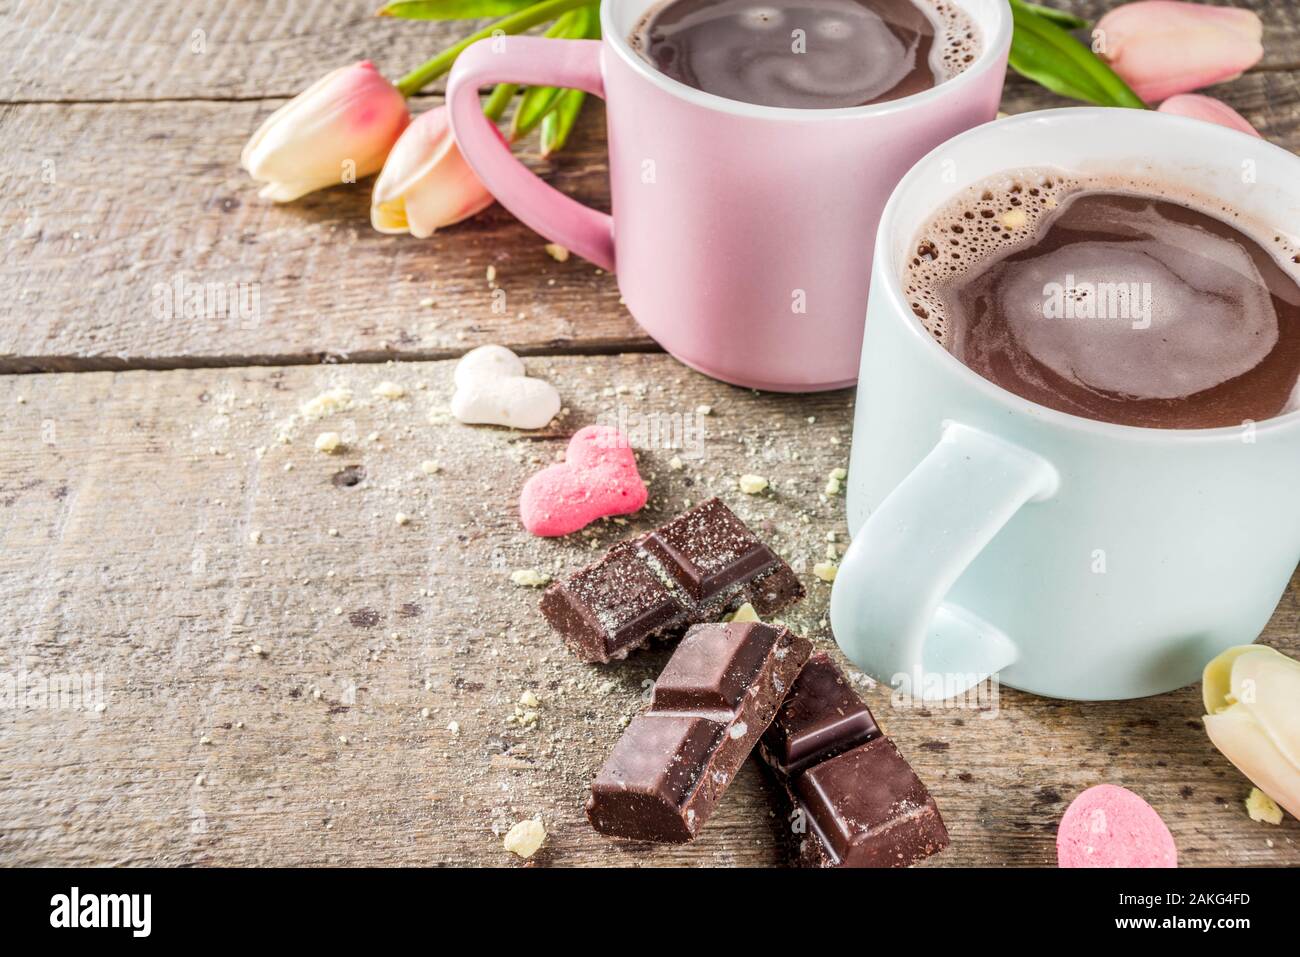 https://c8.alamy.com/comp/2AKG4FD/valentines-day-treat-ideas-two-cups-hot-chocolate-drink-with-marshmallow-hearts-red-pink-white-color-with-chocolate-pieces-sugar-sprinkles-old-wood-2AKG4FD.jpg